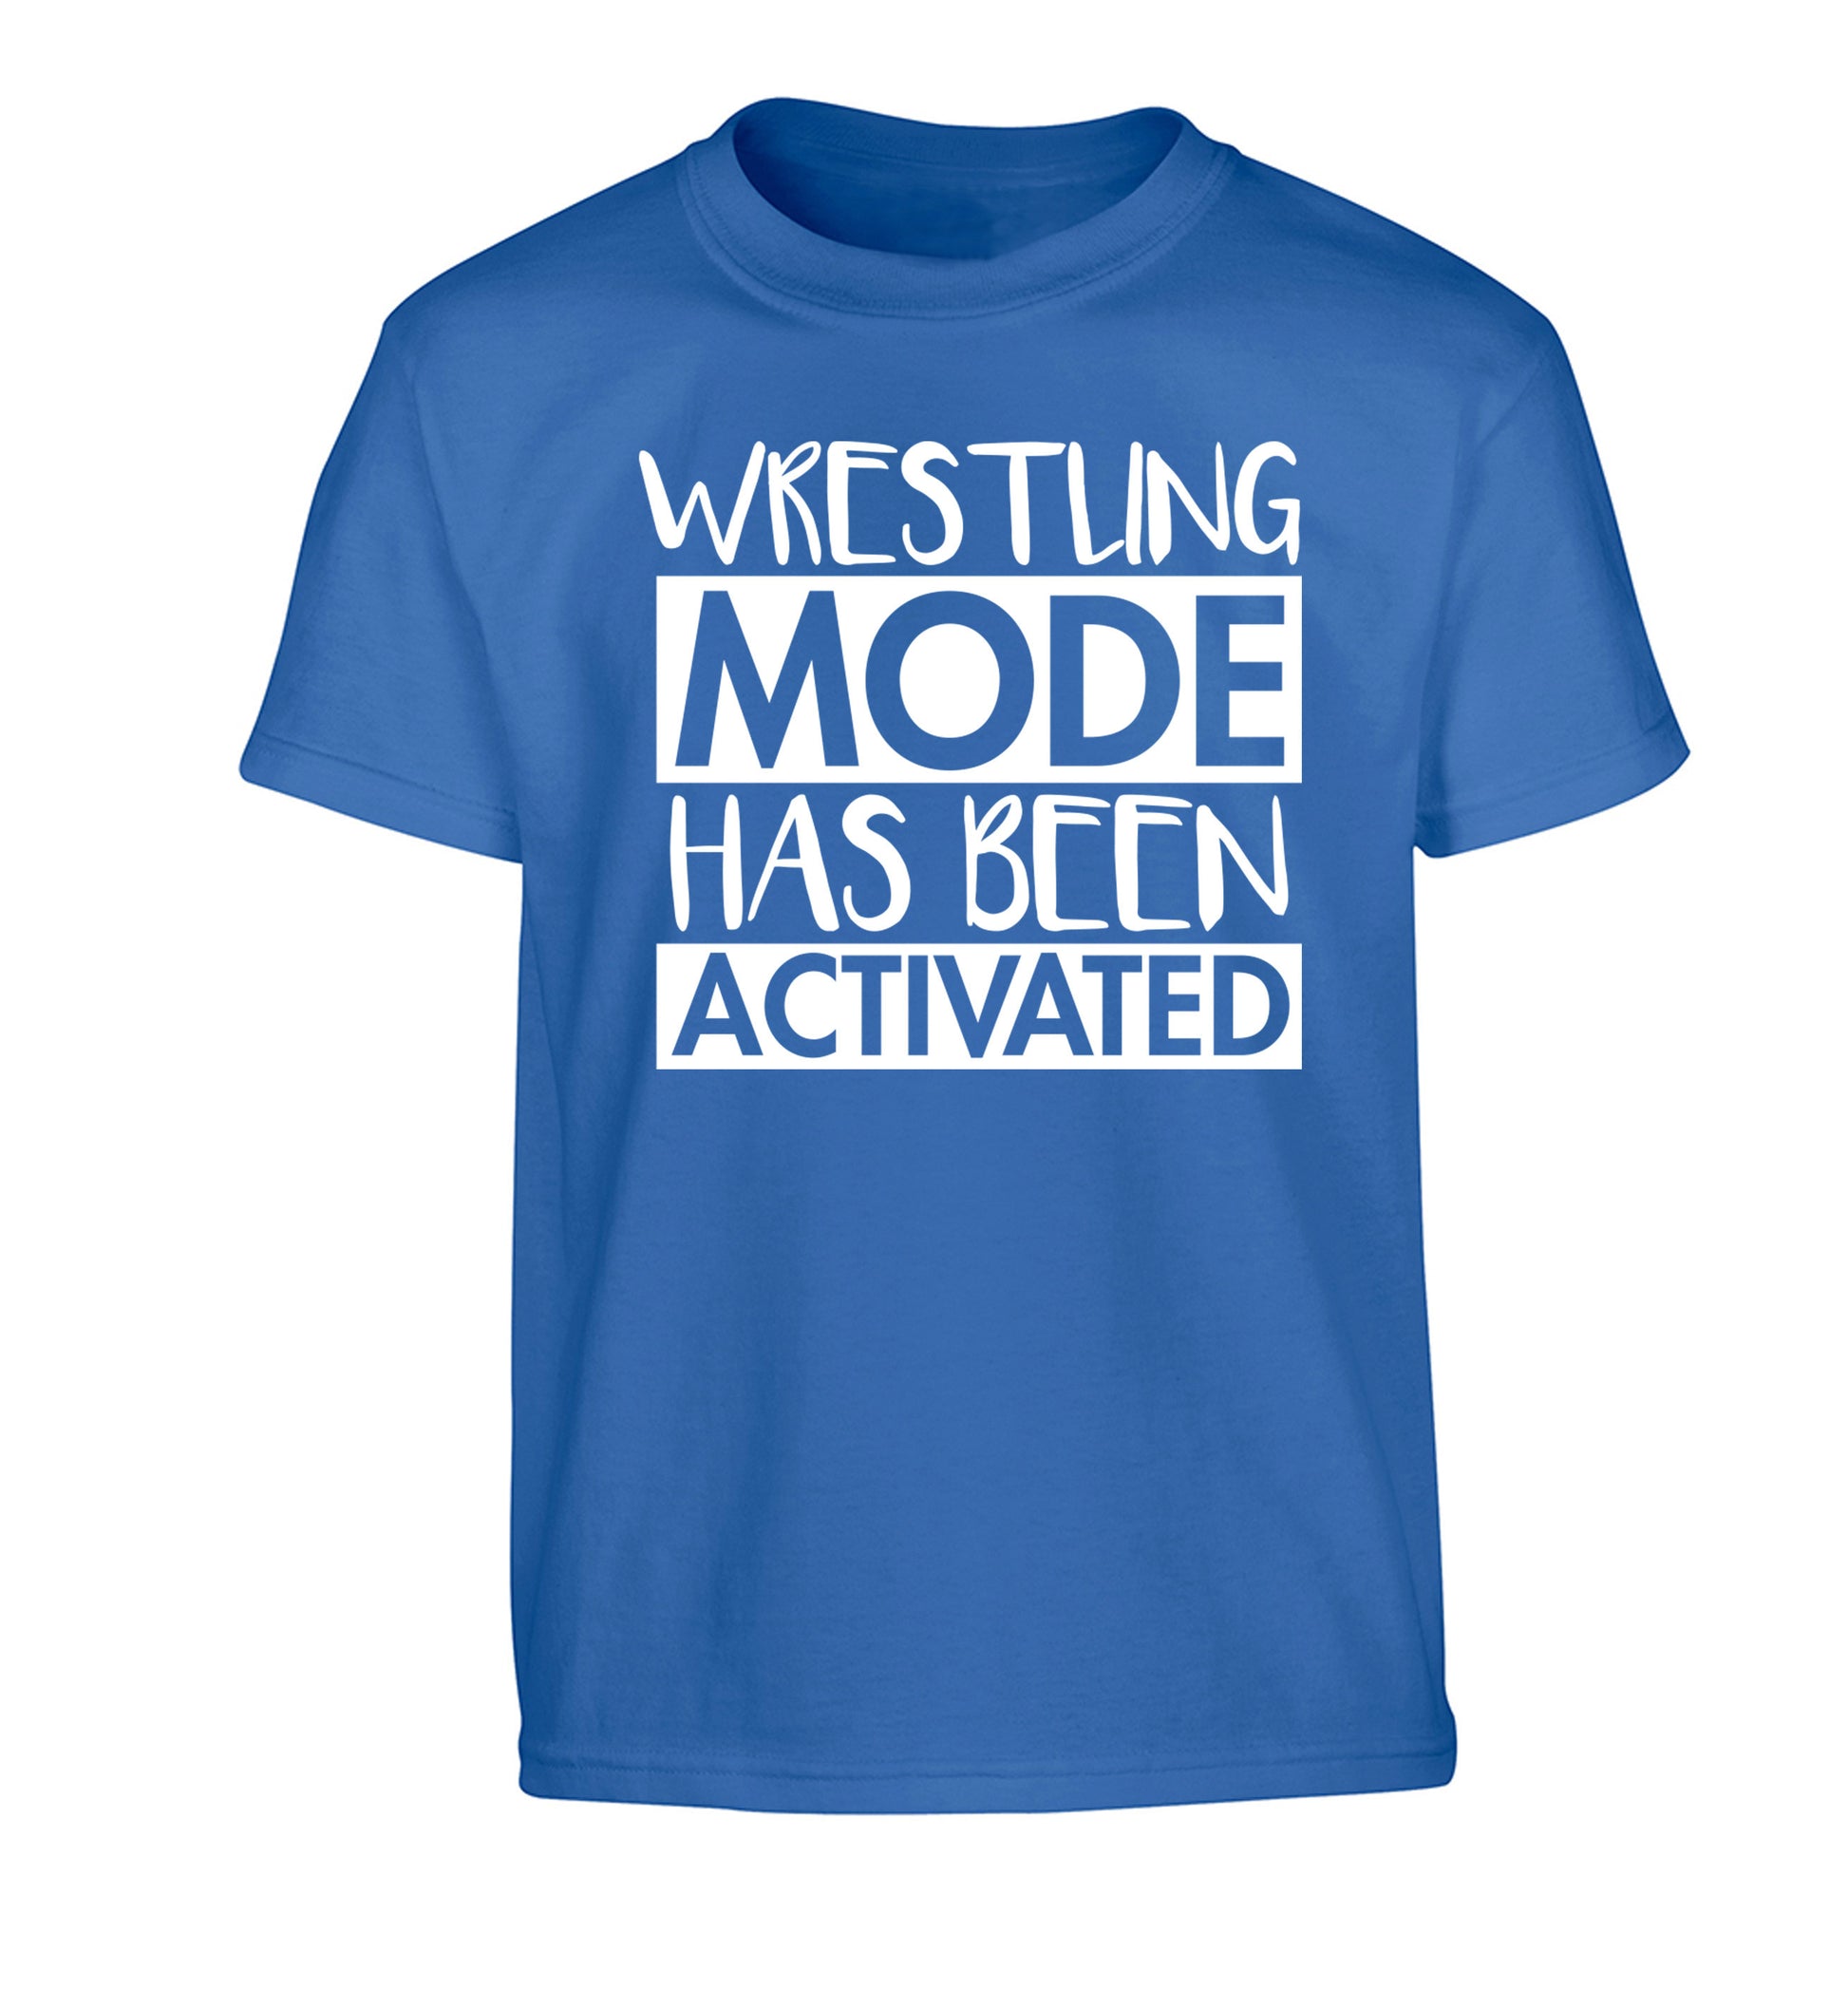 Wresting mode activated Children's blue Tshirt 12-14 Years